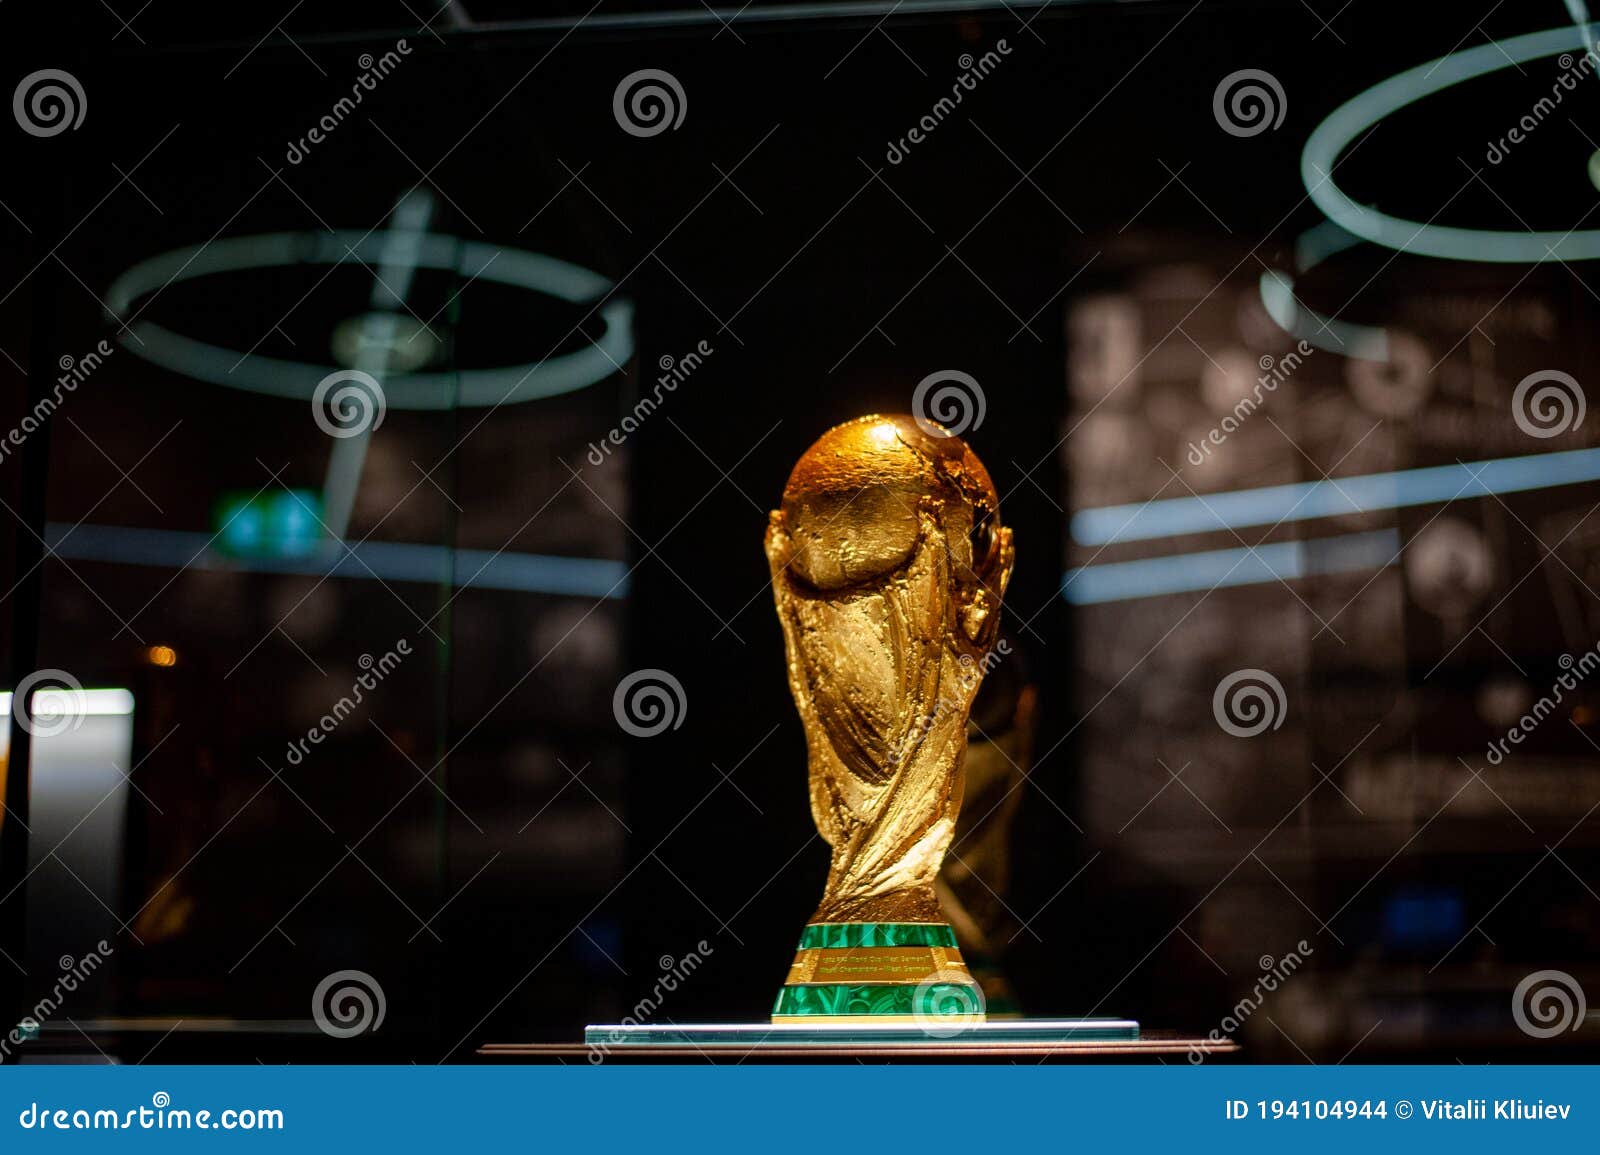 Fifa world cup trophy on hi-res stock photography and images - Alamy